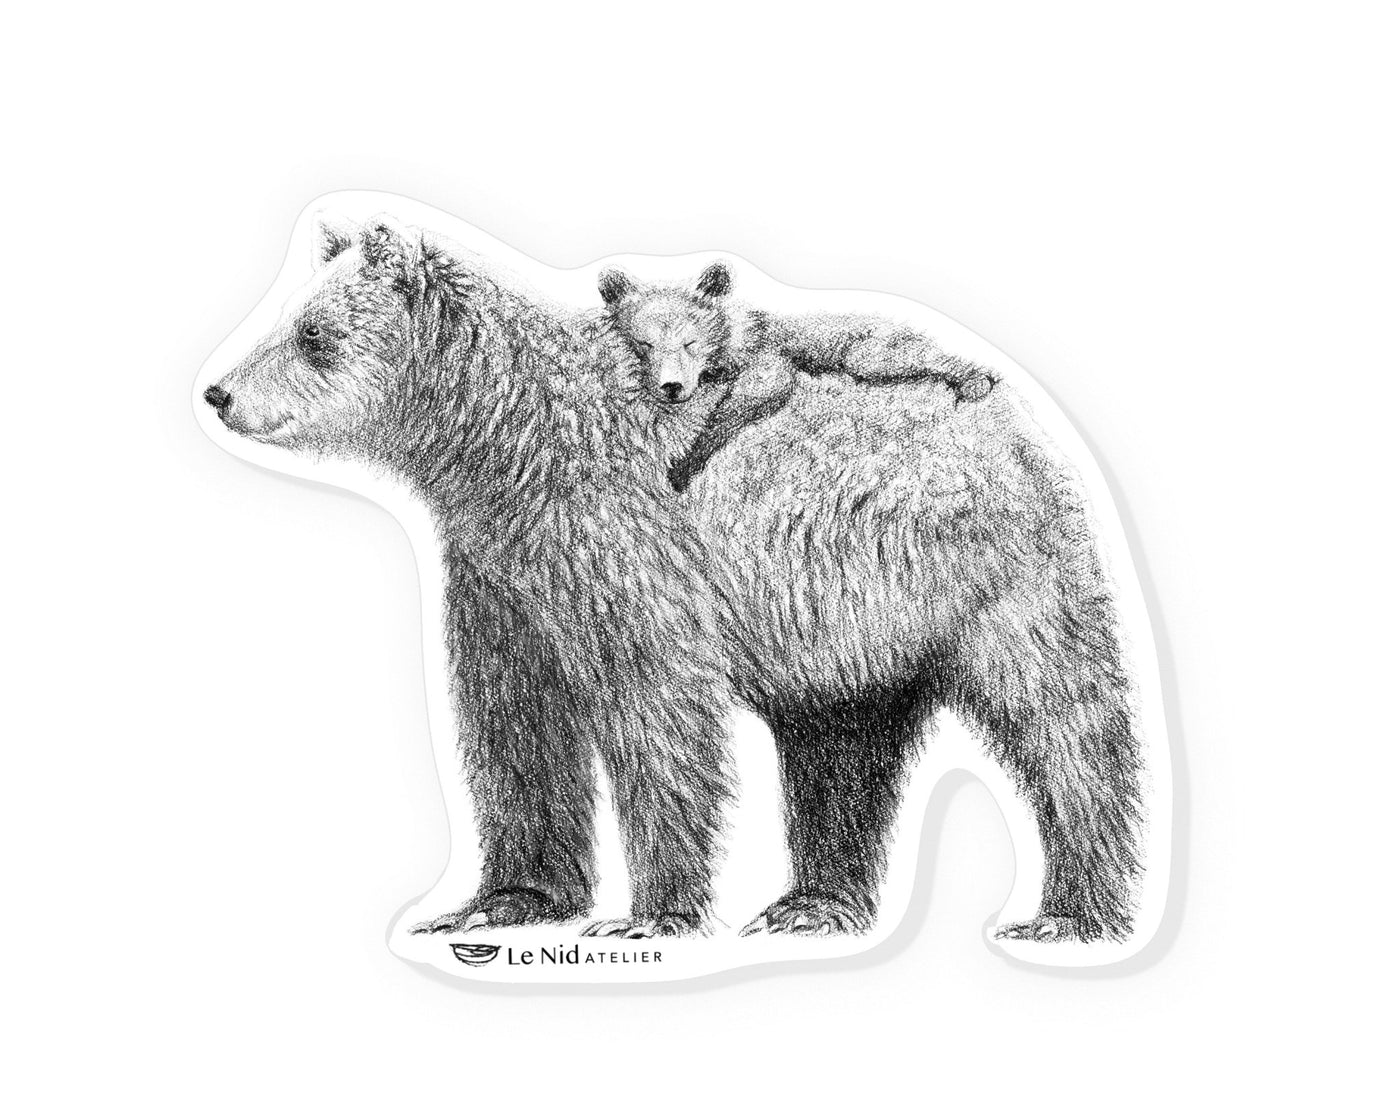 Grizzly with cub on back Sticker for Water Bottle, Agenda or Computer - LE NID atelier